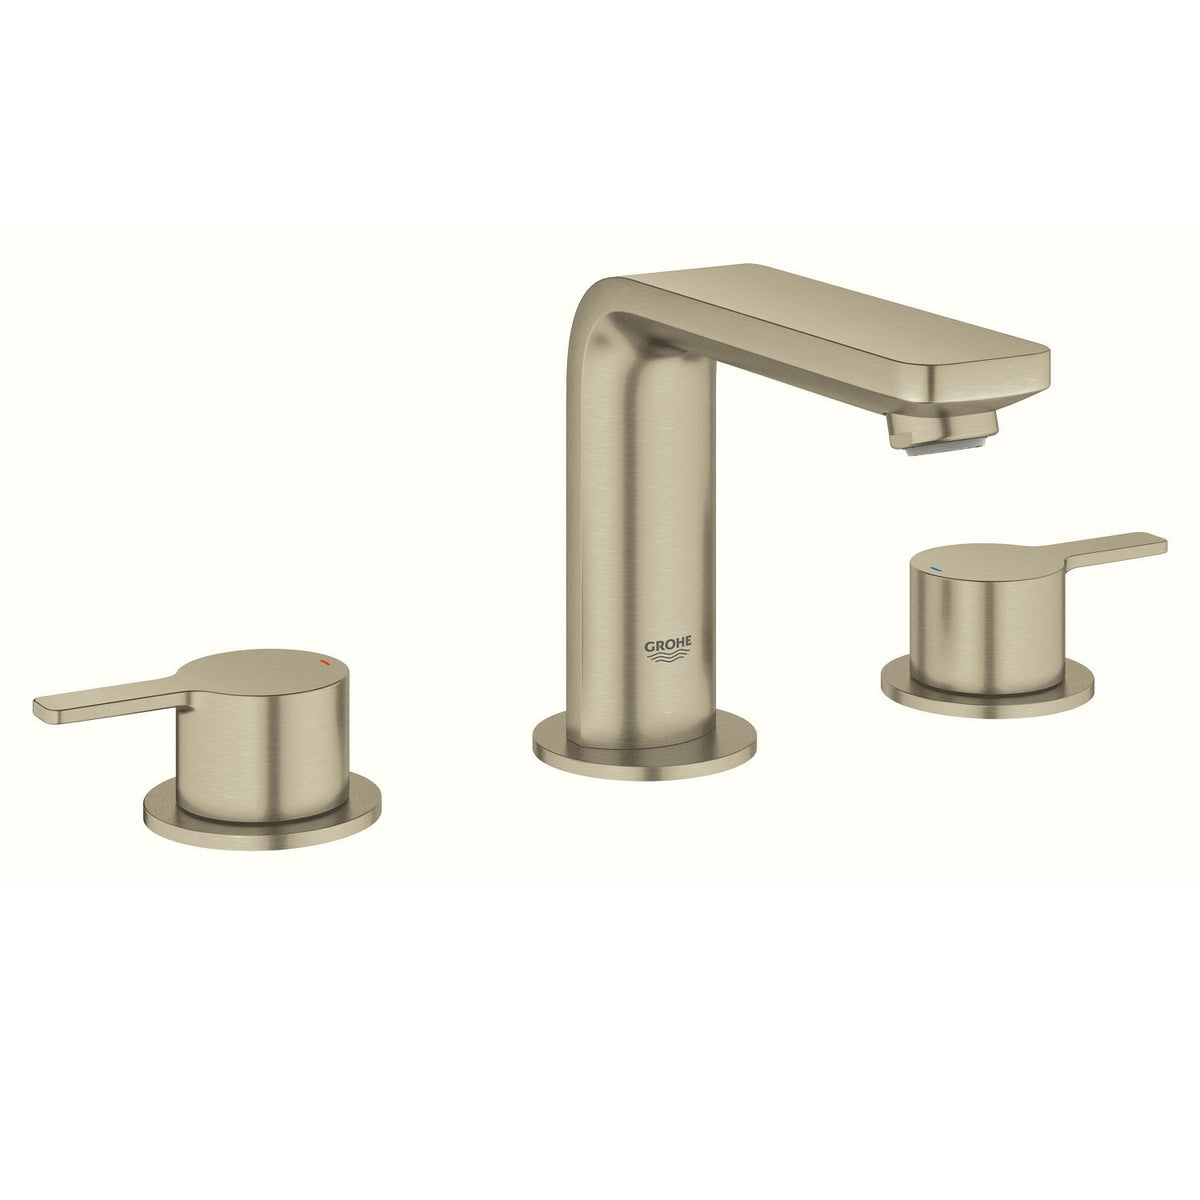 LINEARE 8-INCH WIDESPREAD 2-HANDLE M-SIZE BATHROOM FAUCET